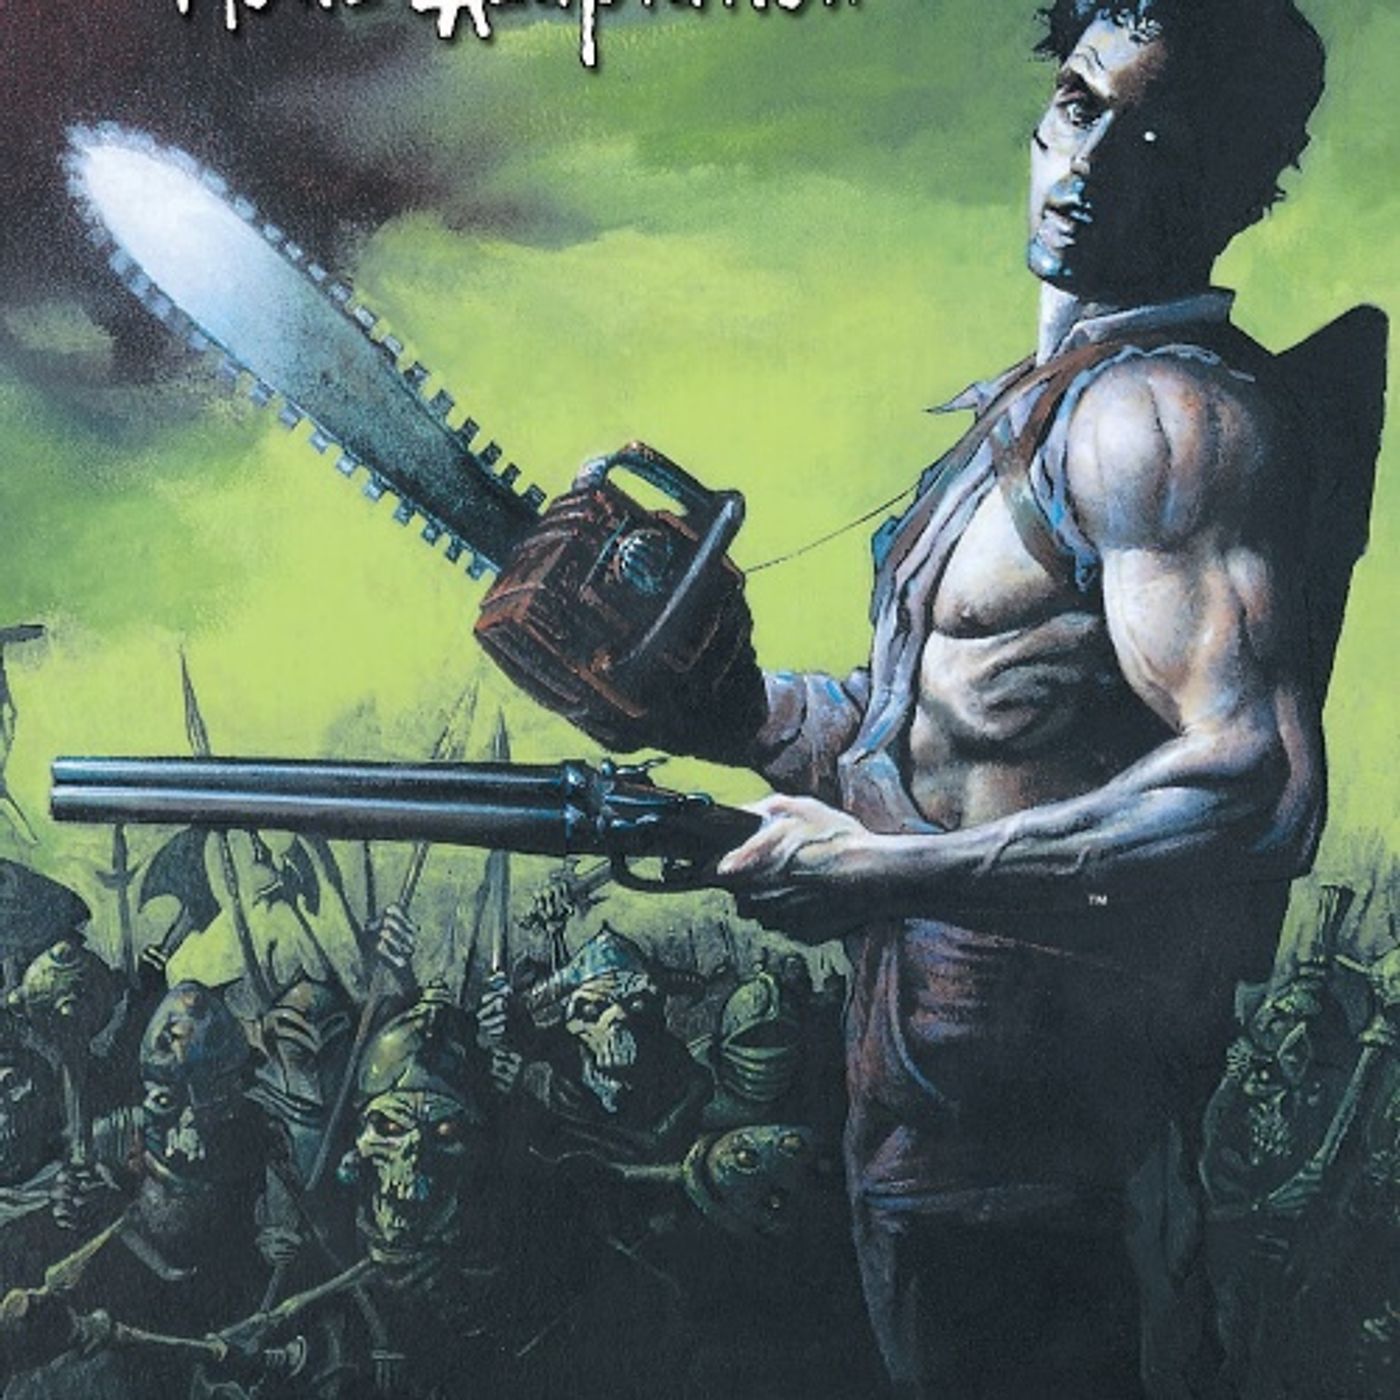 Unspoken Issues #70 - Army of Darkness Movie Adaptation